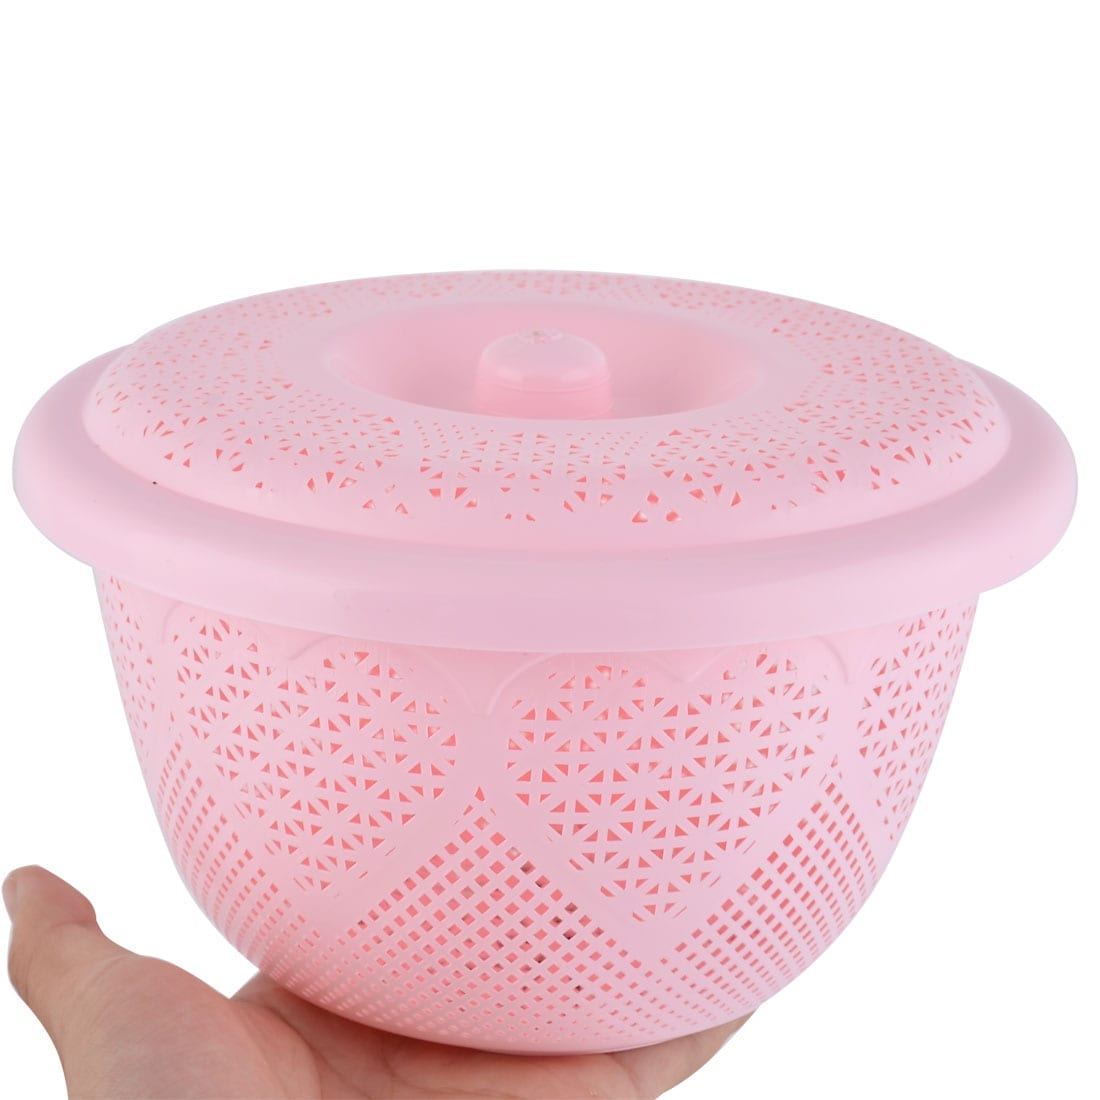 https://ak1.ostkcdn.com/images/products/is/images/direct/a0a10128961d580aec2bdfe5adc3865f936f9941/Home-Plastic-Fruit-Vegetable-Washing-Colander-Strainer-Basket-Container-Pink.jpg